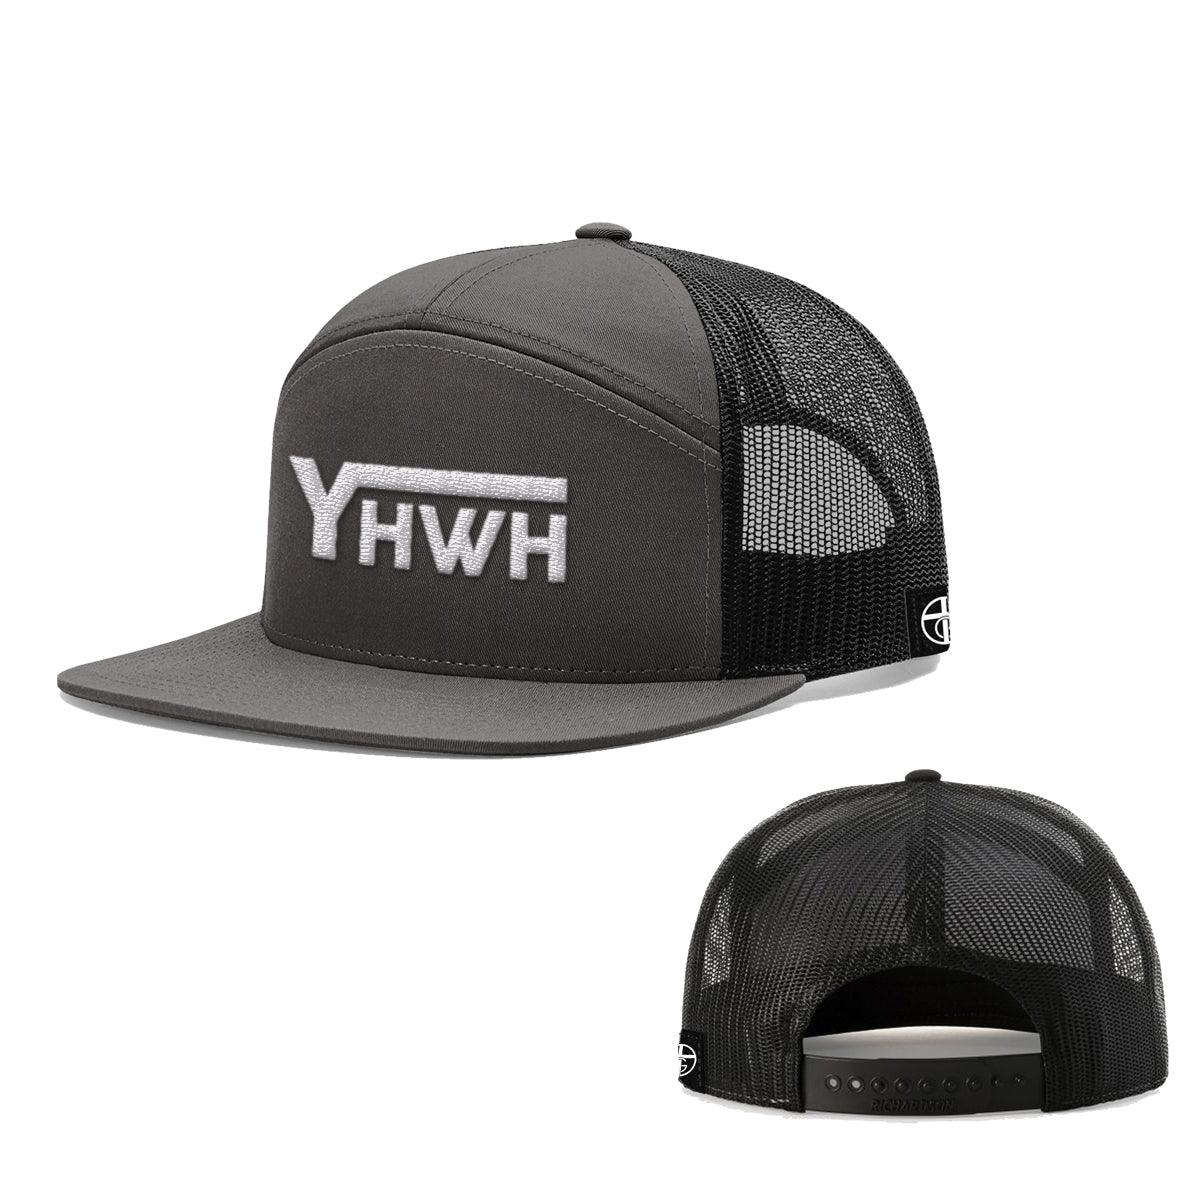 YHWH 7 Panel Hats - Our True God